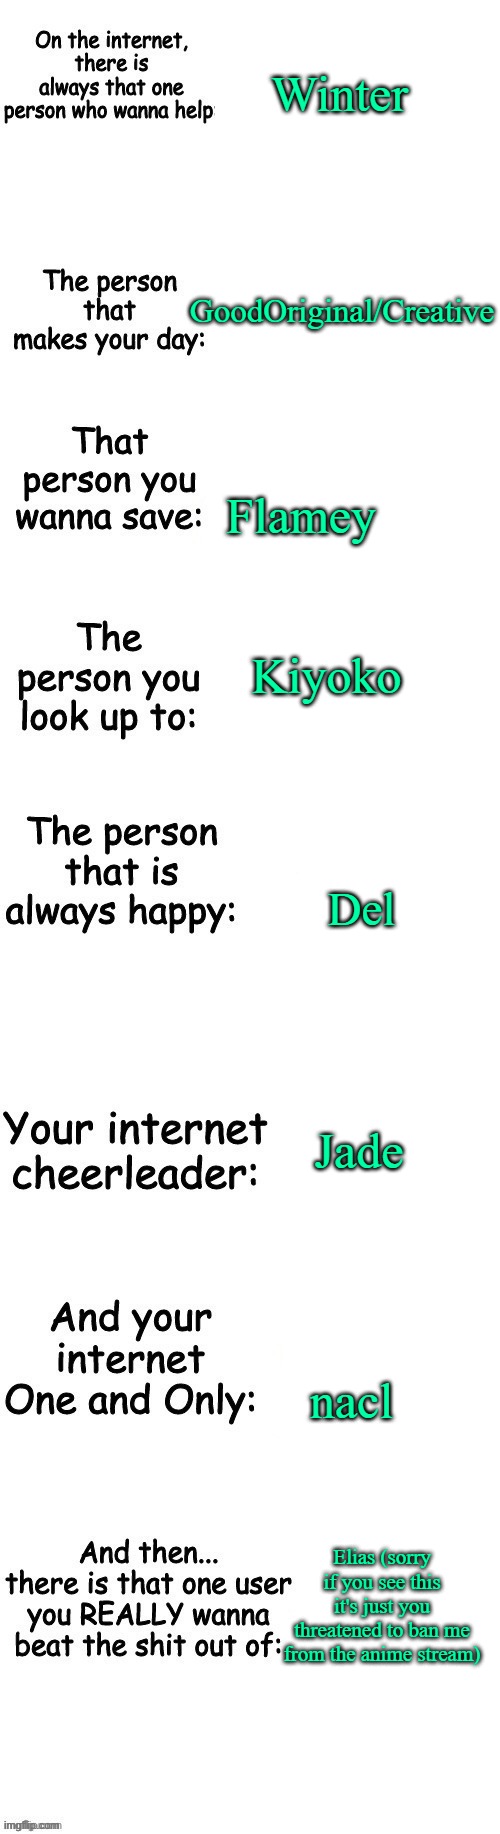 People on the internet | Winter; GoodOriginal/Creative; Flamey; Kiyoko; Del; Jade; nacl; Elias (sorry if you see this it's just you threatened to ban me from the anime stream) | image tagged in people on the internet | made w/ Imgflip meme maker